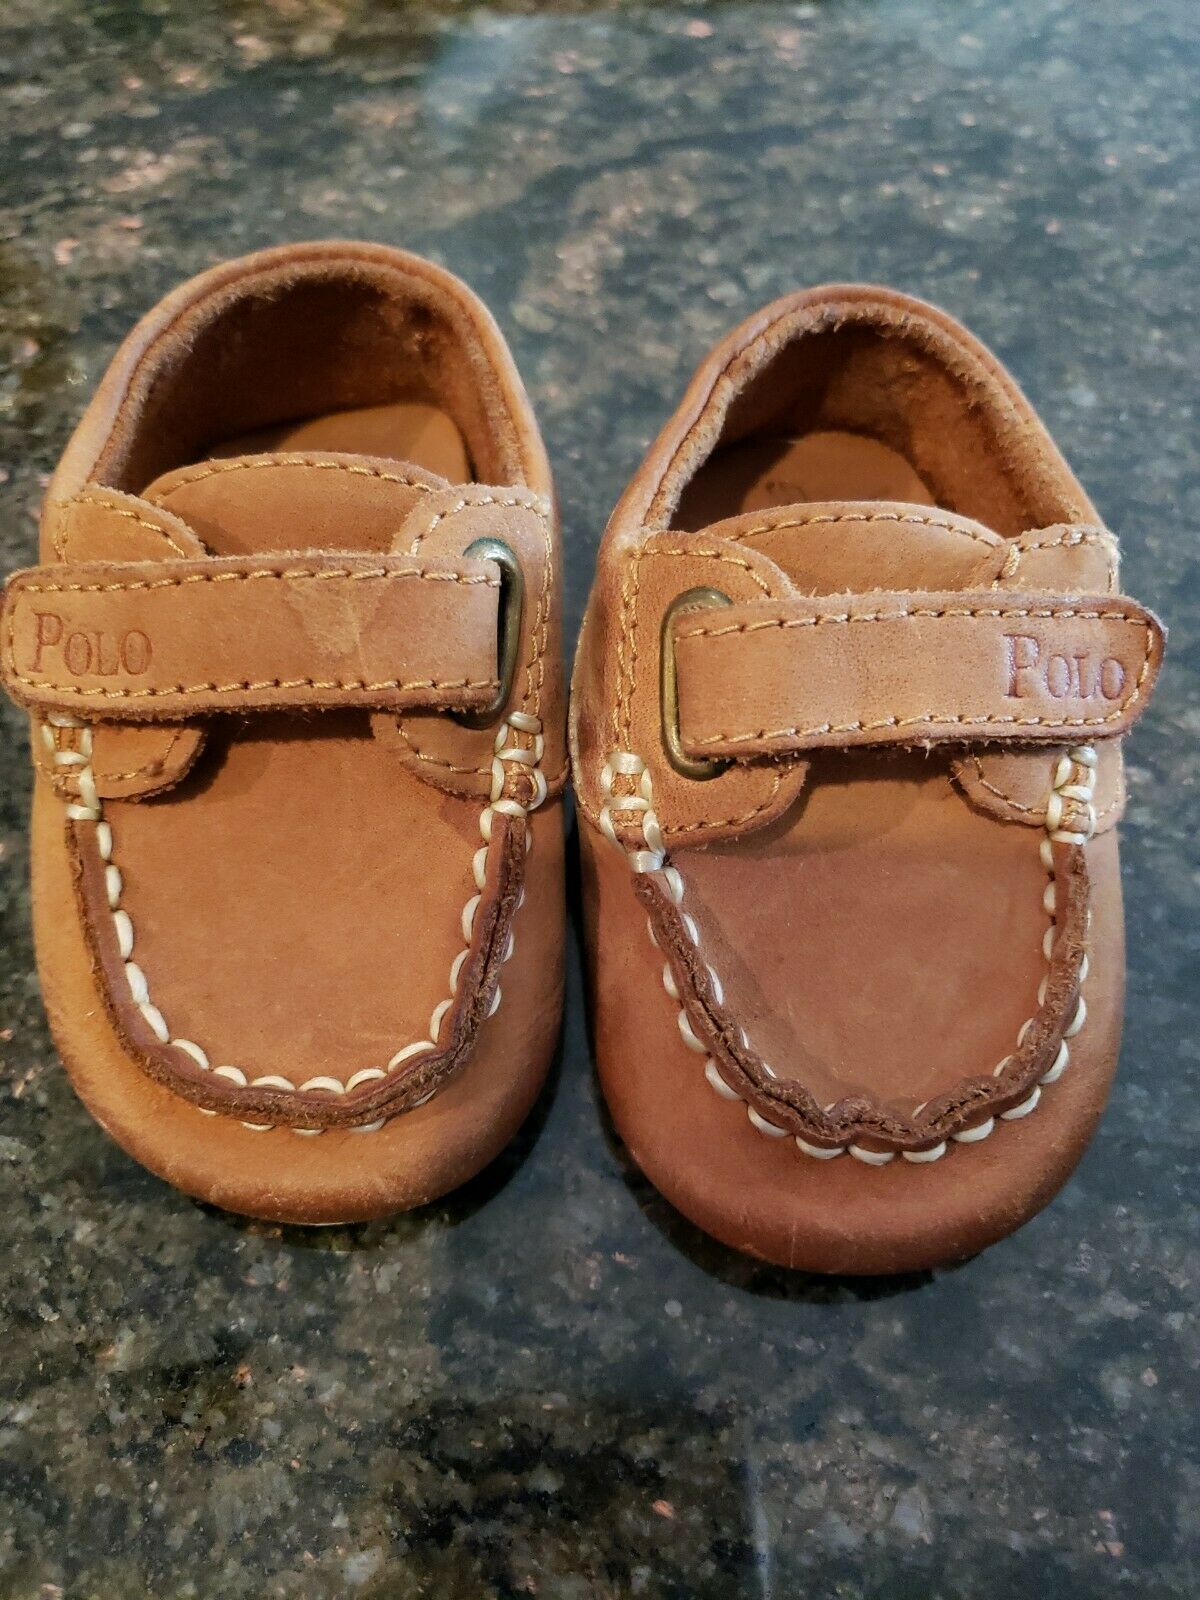 Polo Ralph Lauren Infant Boys Leather Loafer Shoes Size 2